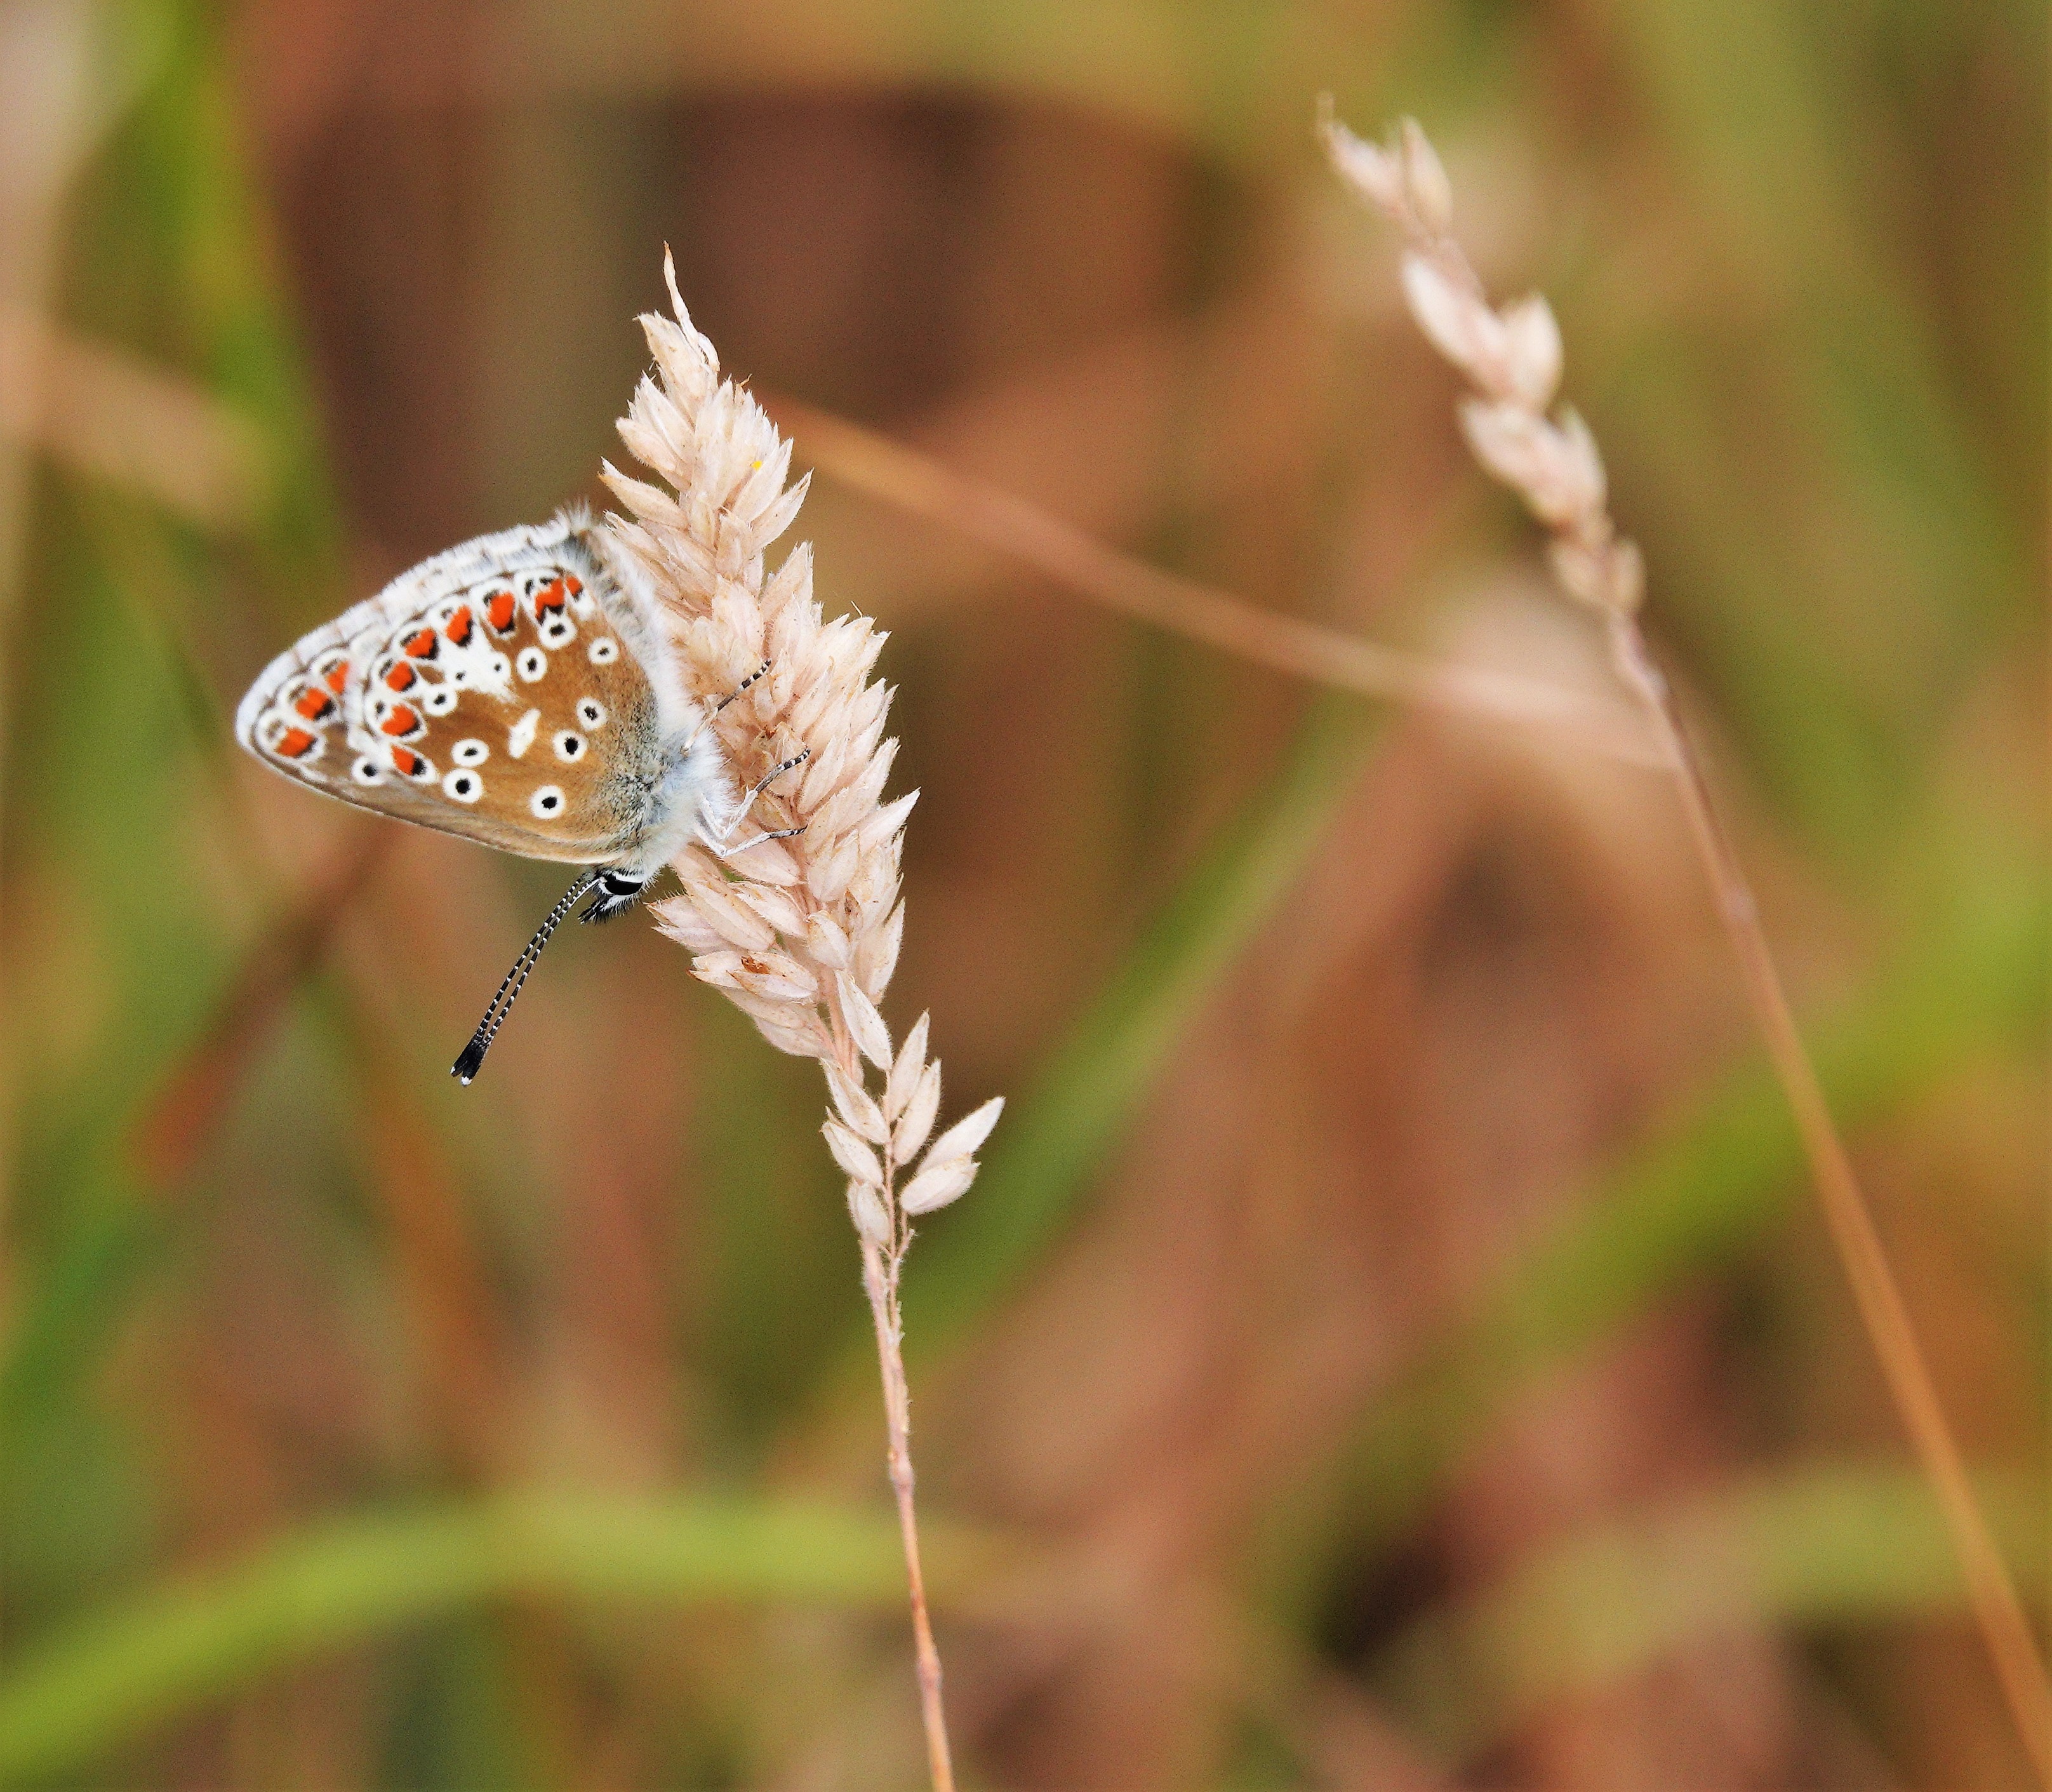 3. Brown Argus underside showing the distinctive figure of eight spotting.